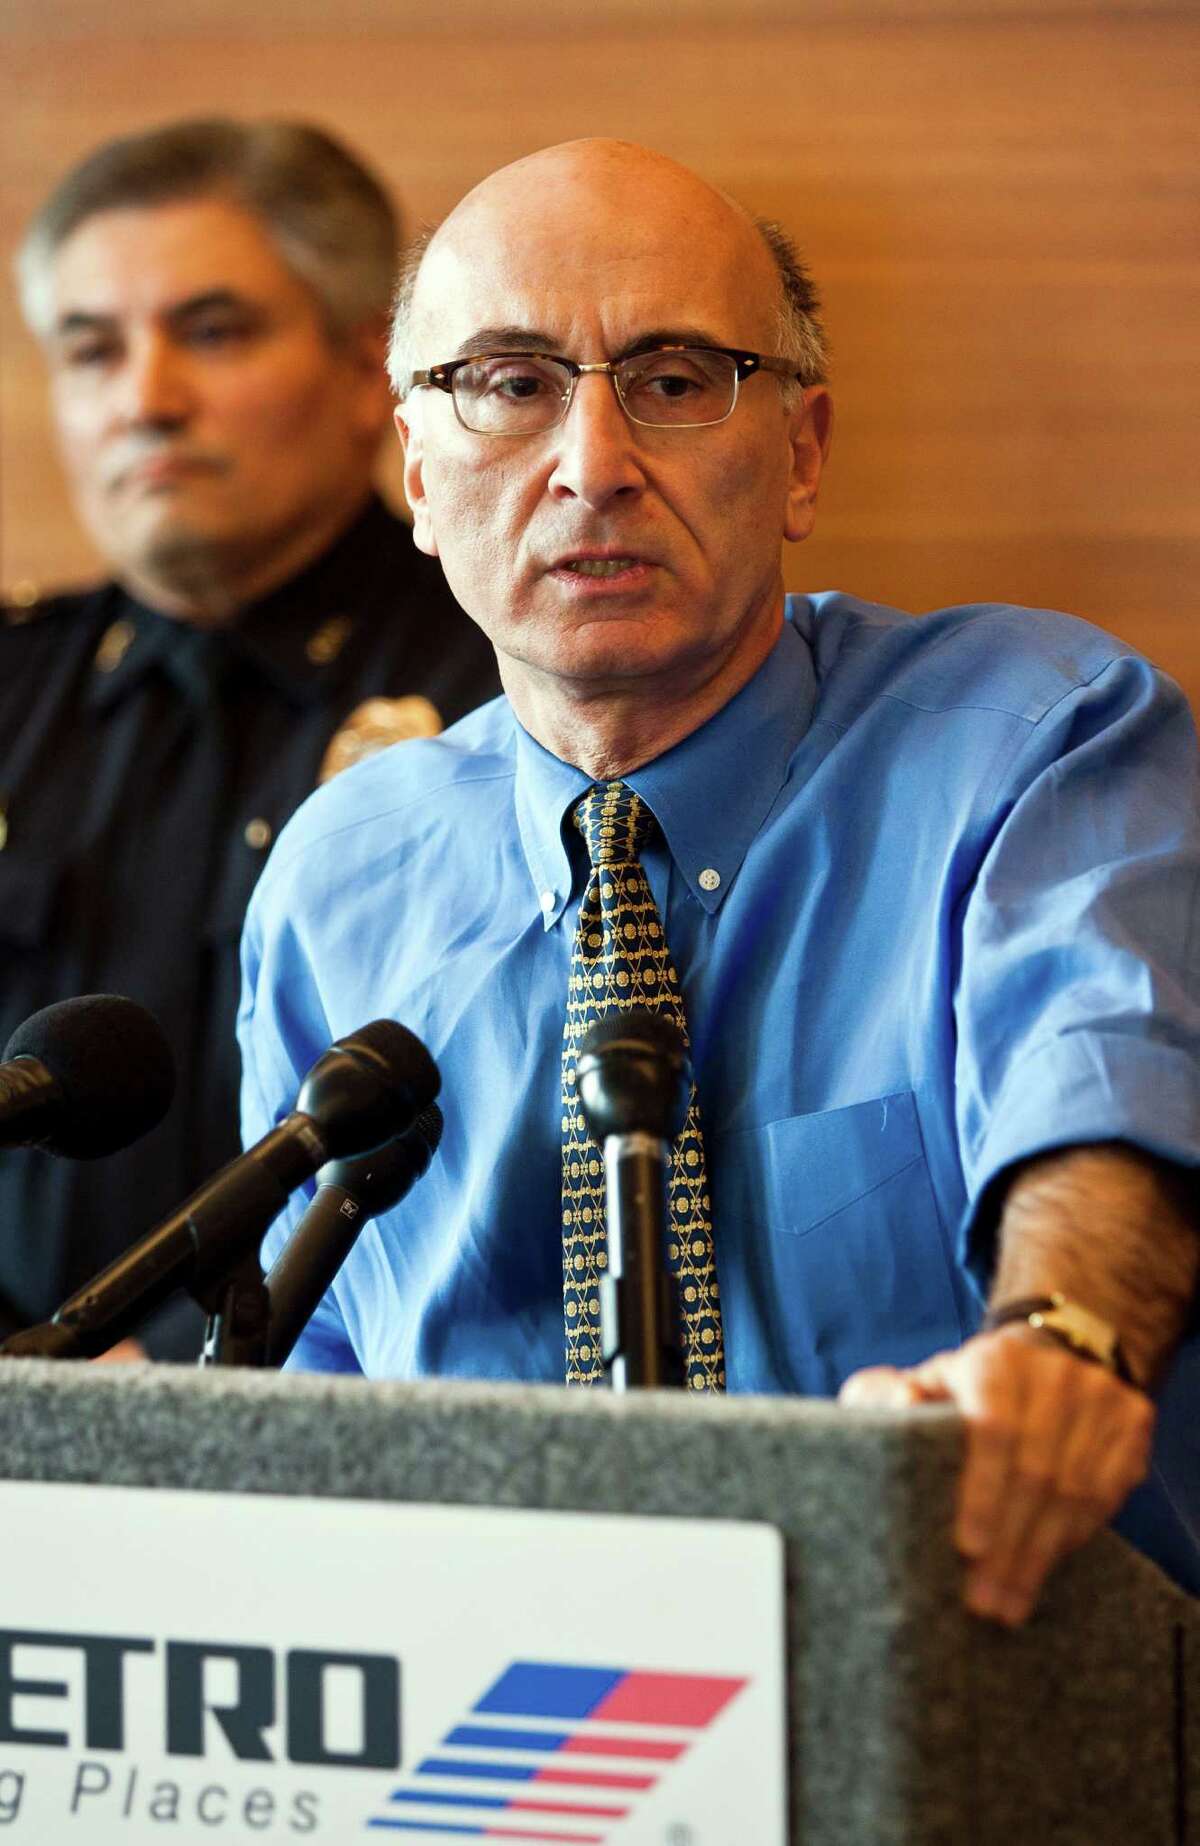 Metro CEO George Greanias speaks at the METRO headquarters regarding the death of bus driver David Sayers on Thursday, June 23, 2011 in Houston. ( Patrick T. Fallon / Houston Chronicle )